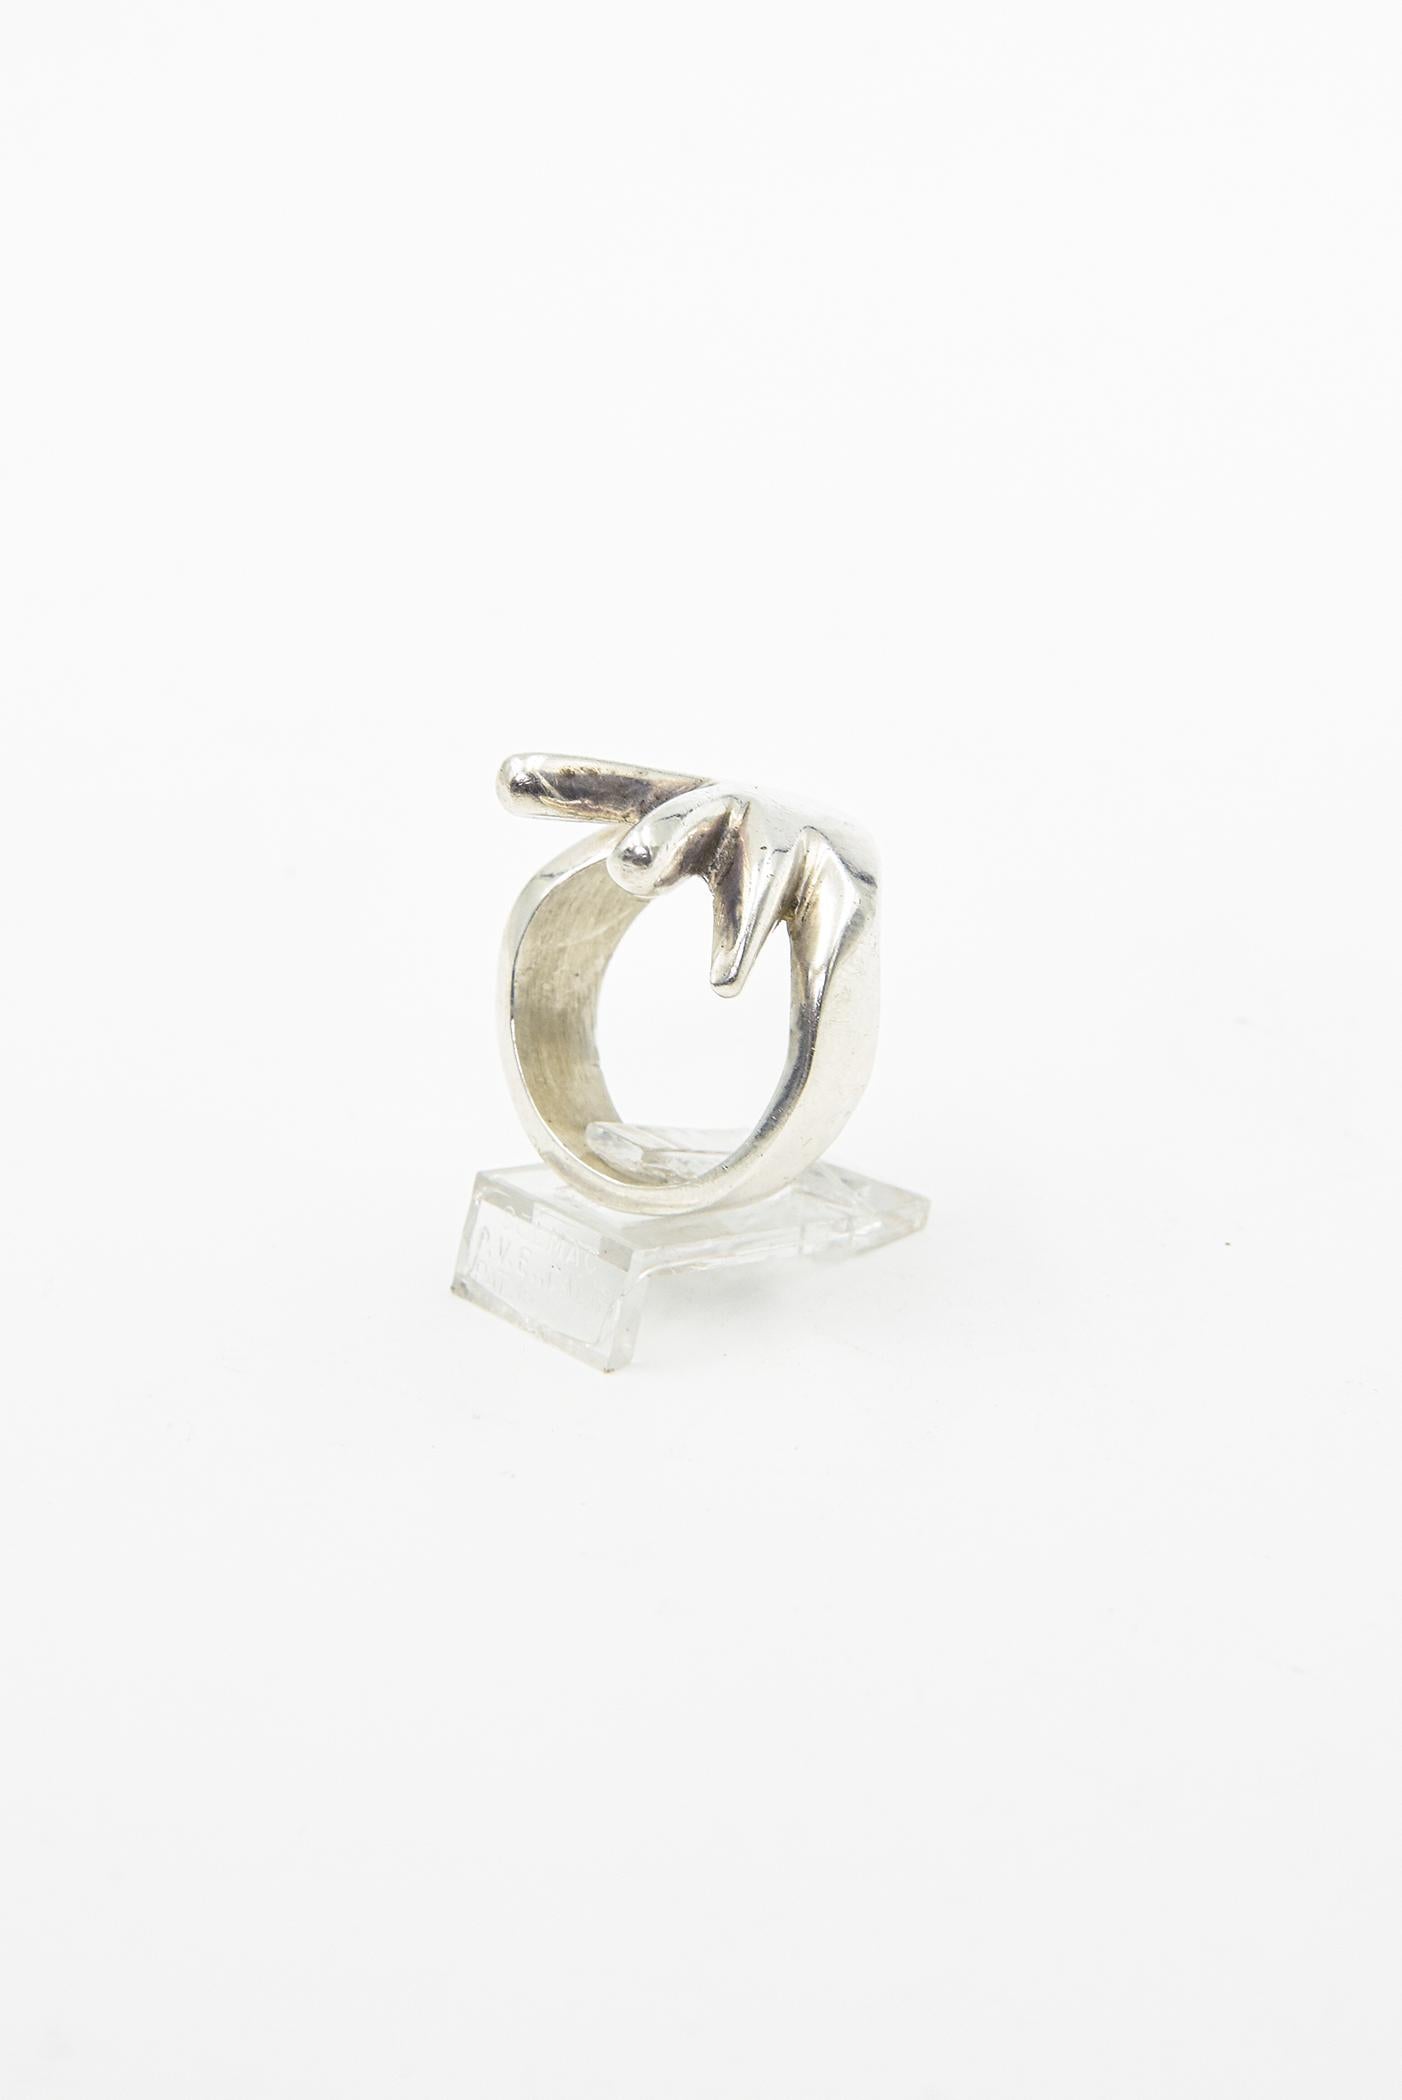 Mexican Sterling Silver Hand Ring In Good Condition For Sale In Miami Beach, FL